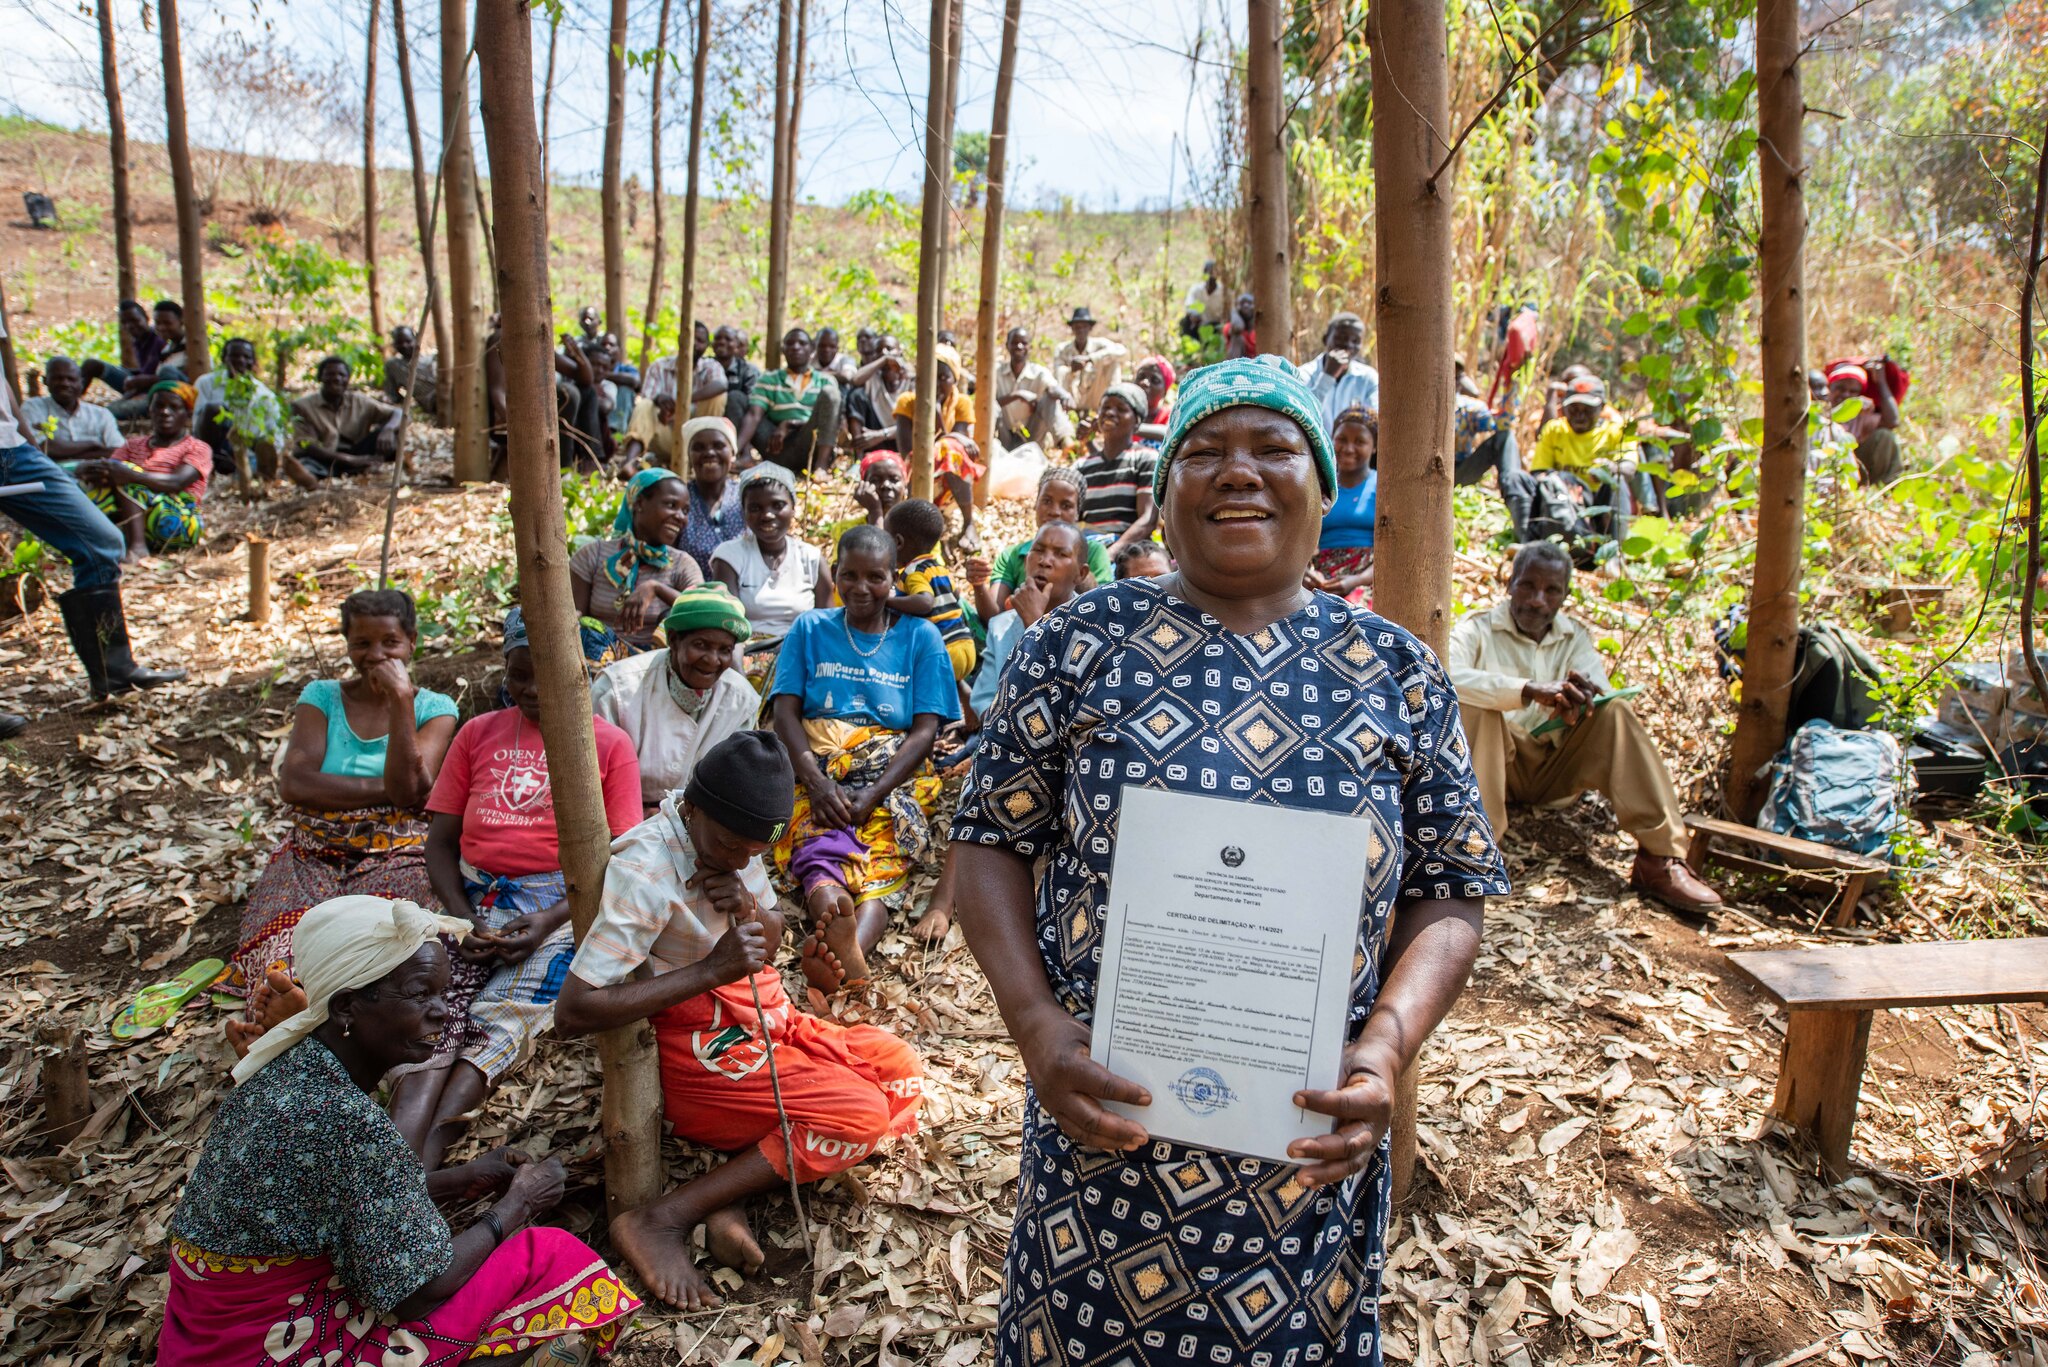 Queen Adelina of Mucunha holding the legal deed that recognizes the ownership of Namuli’s land by the Lomwe people. This is a historical achievement in a region with a legacy of colonial occupation and displacement of community in favor of external enterprises. As part of the process of land delimitation, 70% of the household lands have been titled to women reinforcing their central role in Lomwe culture and politics. Photo by Roshni Lodhia/Legado